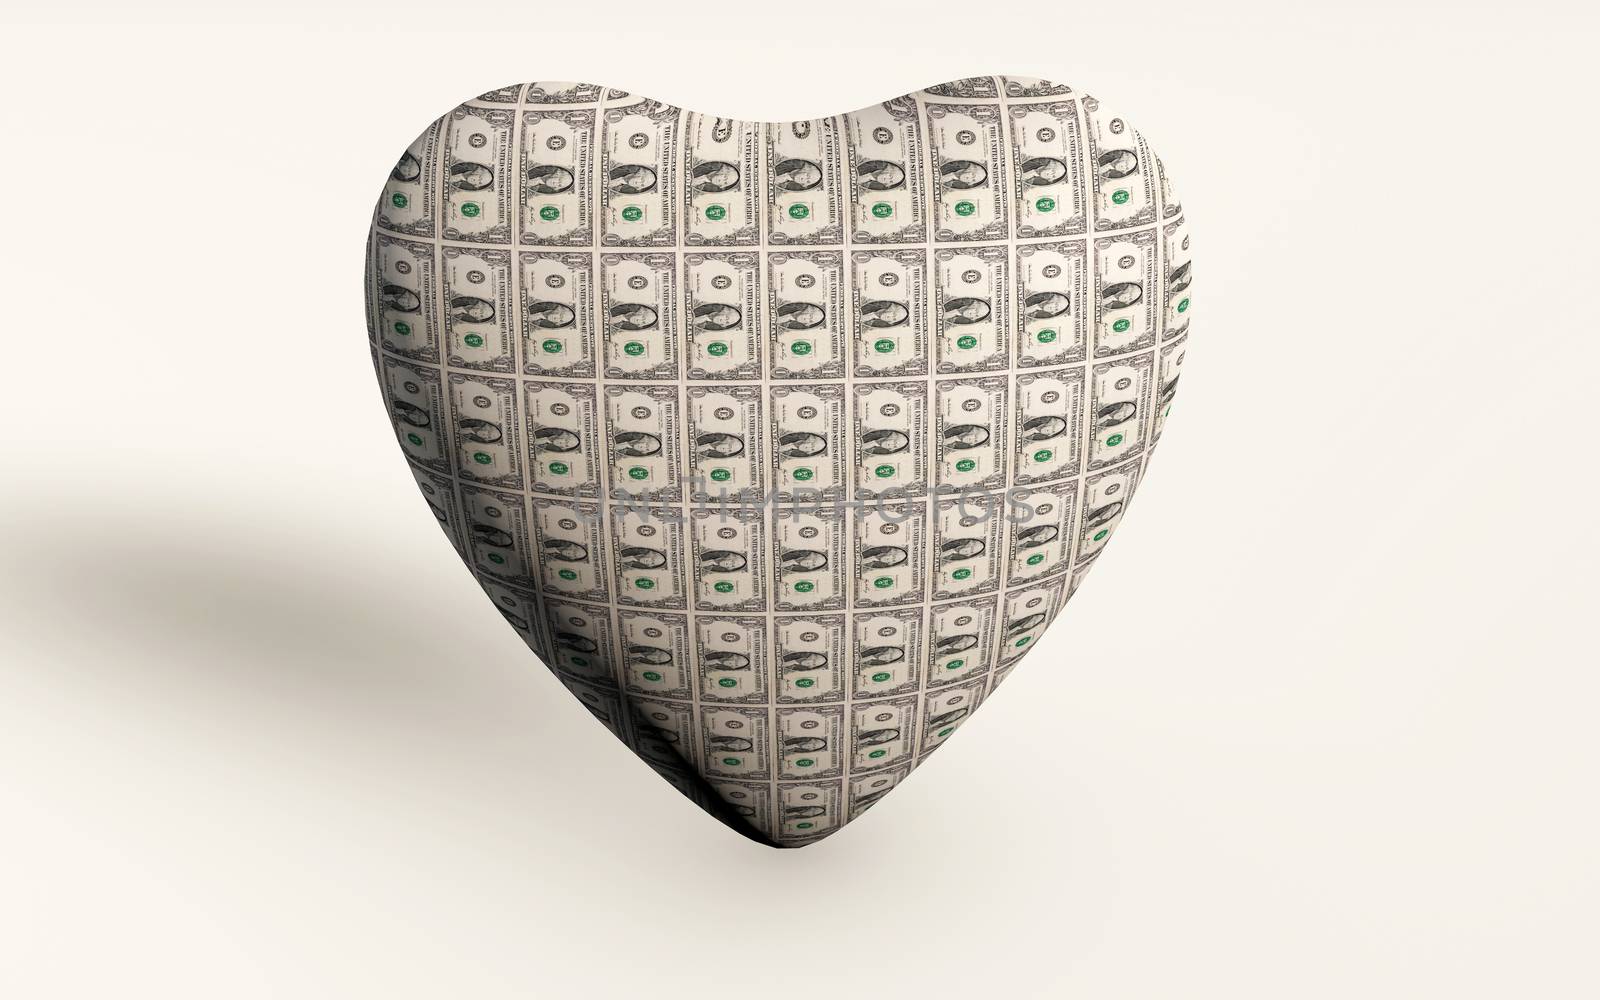 3d rendering of a heart made from us dollars money, a metaphor for balance between work and life